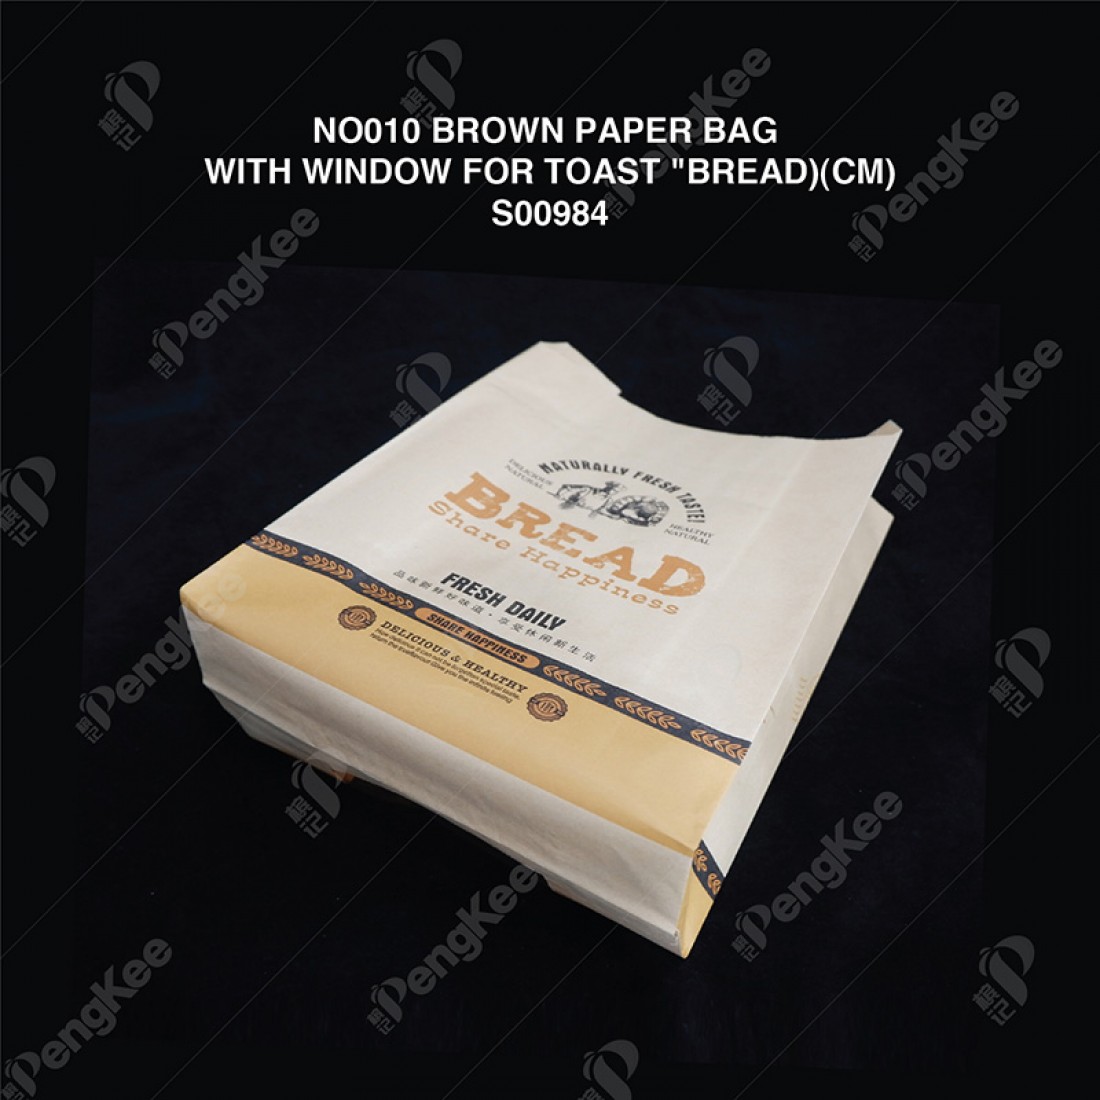 NO010 BROWN PAPER BAG WITH WINDOW FOR TOAST "BREAD)(CM) 